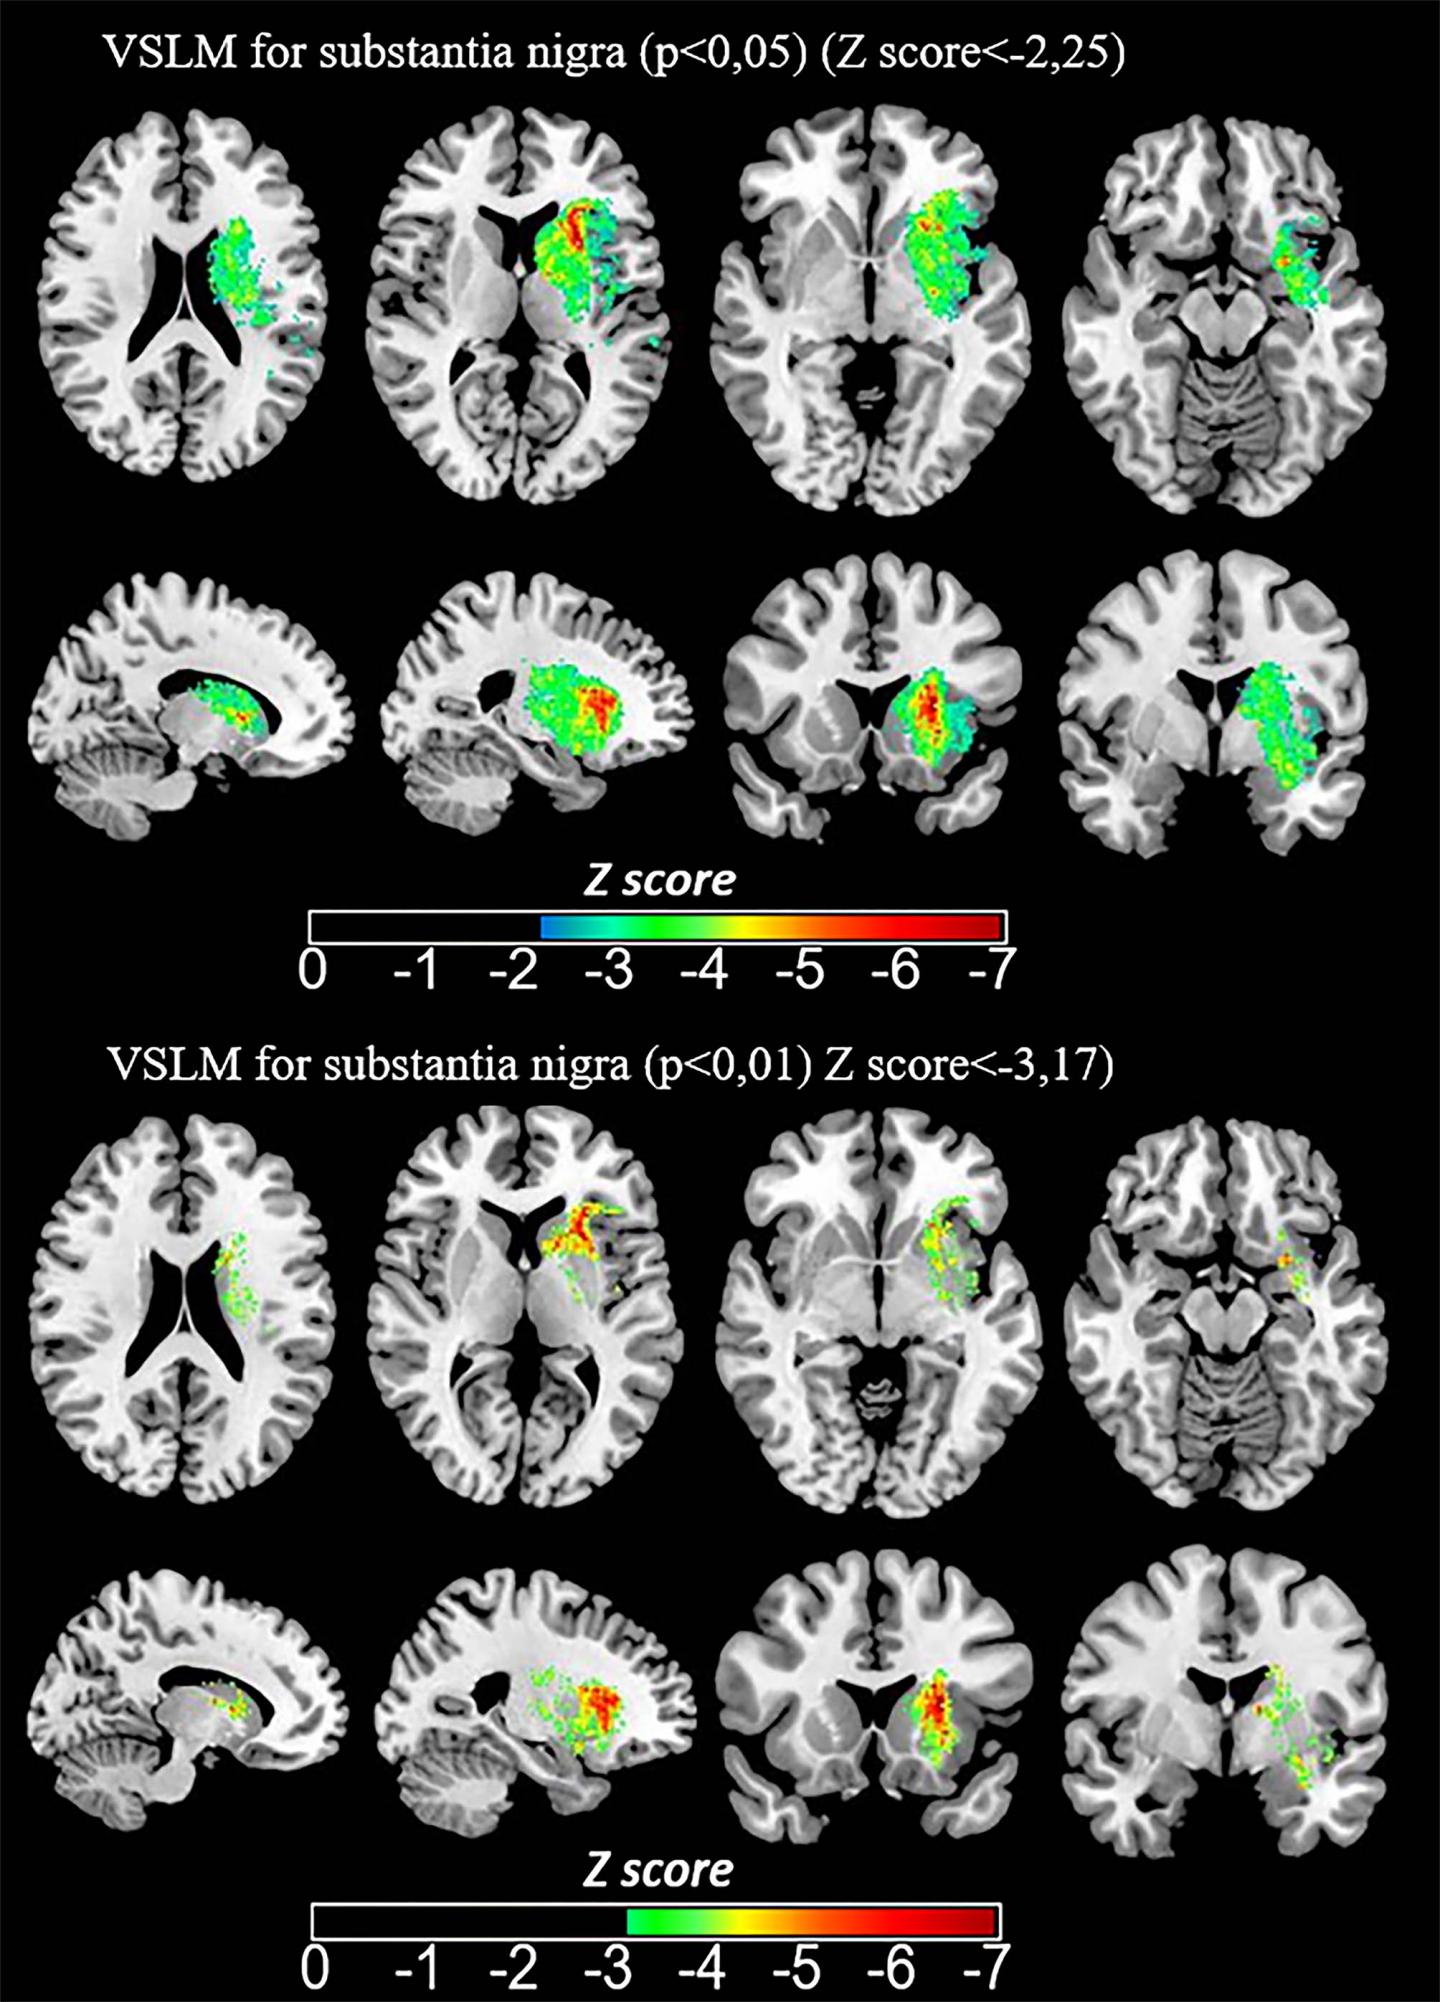 Iron Measurements with MRI Reveal Stroke's Impact on Brain (3 of 3)